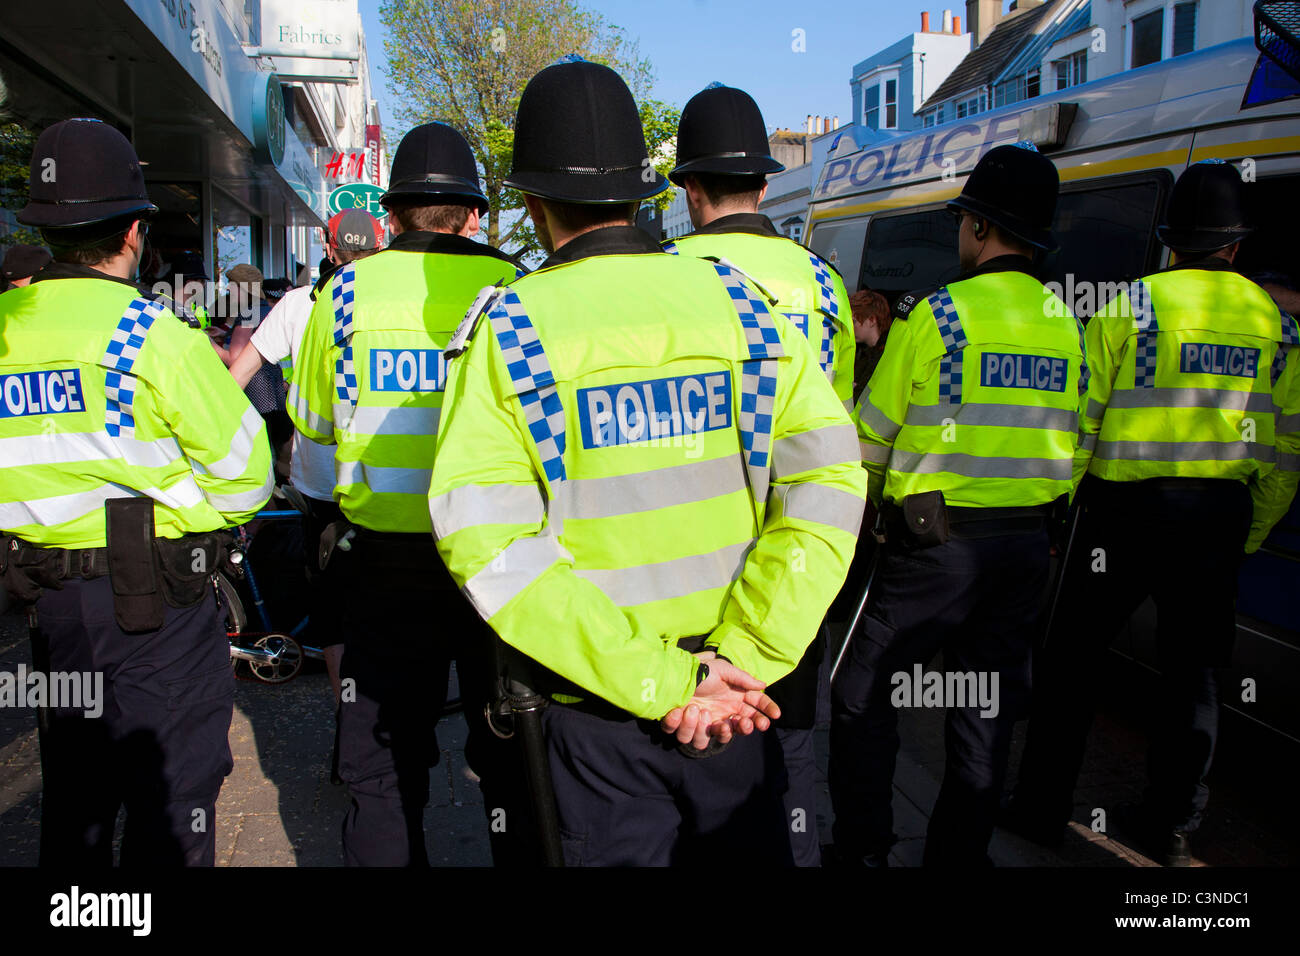 Police surround a group of protesters on the street outside Topshop in Brighton, UK Stock Photo